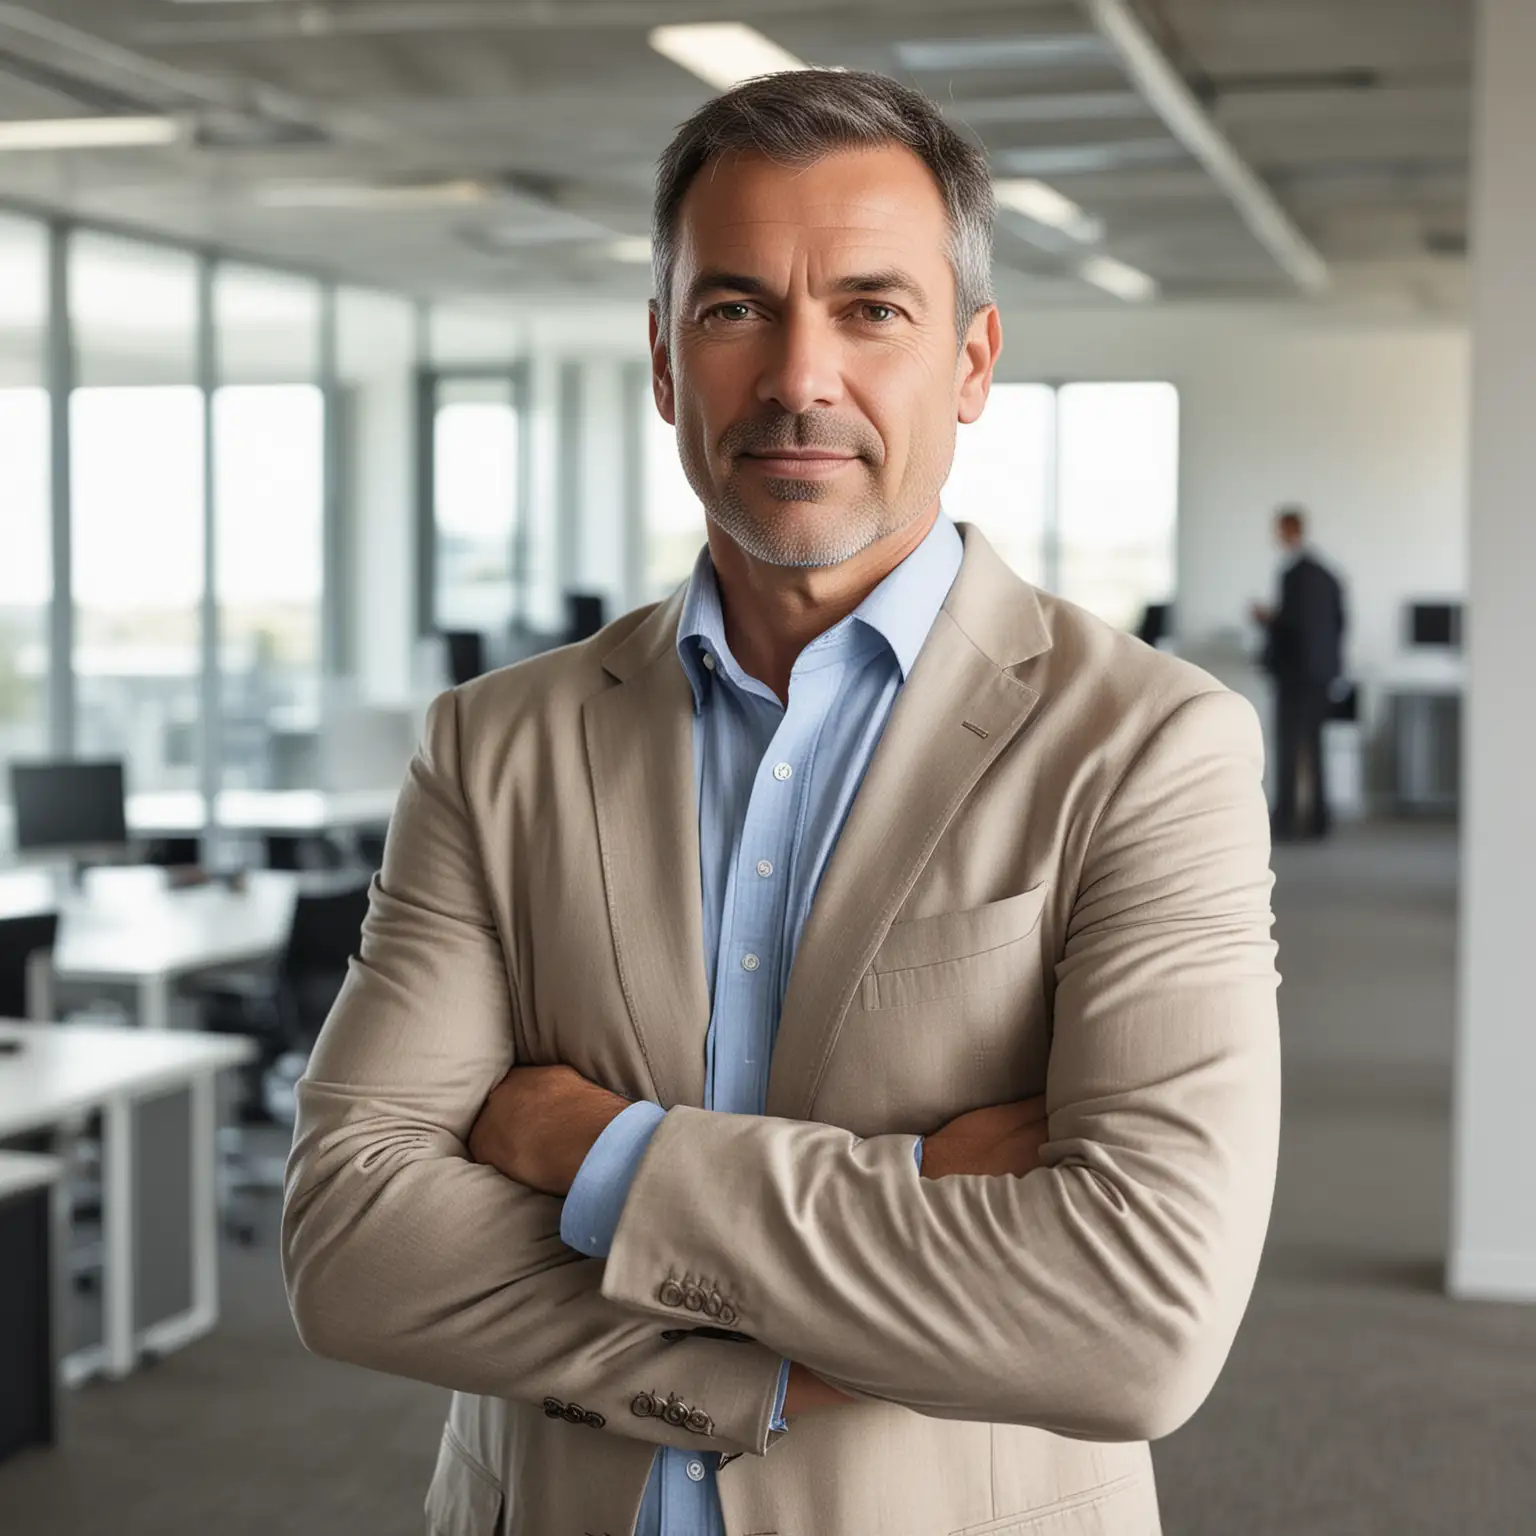 a middle aged business man in business casual clothing standing in the center of a large, modern office. the ambient is light and modern, the man is in focus, the background is slightly blurred.